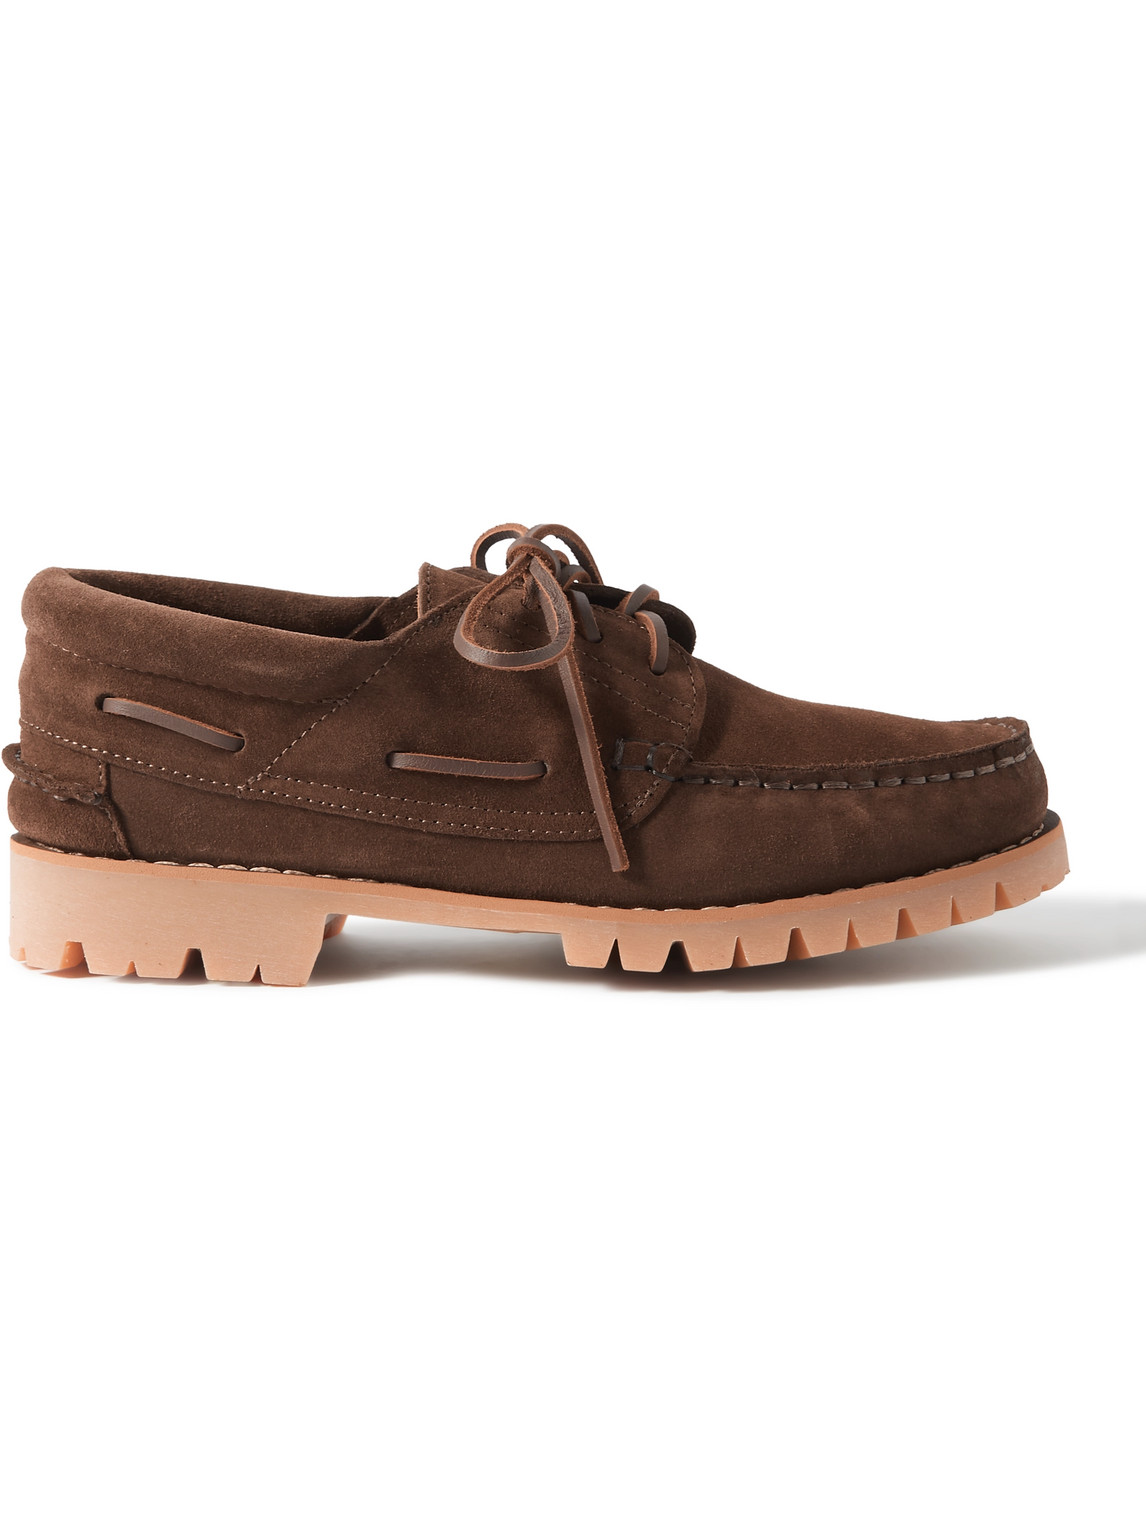 Mr P Caspian Suede Boat Shoes In Brown